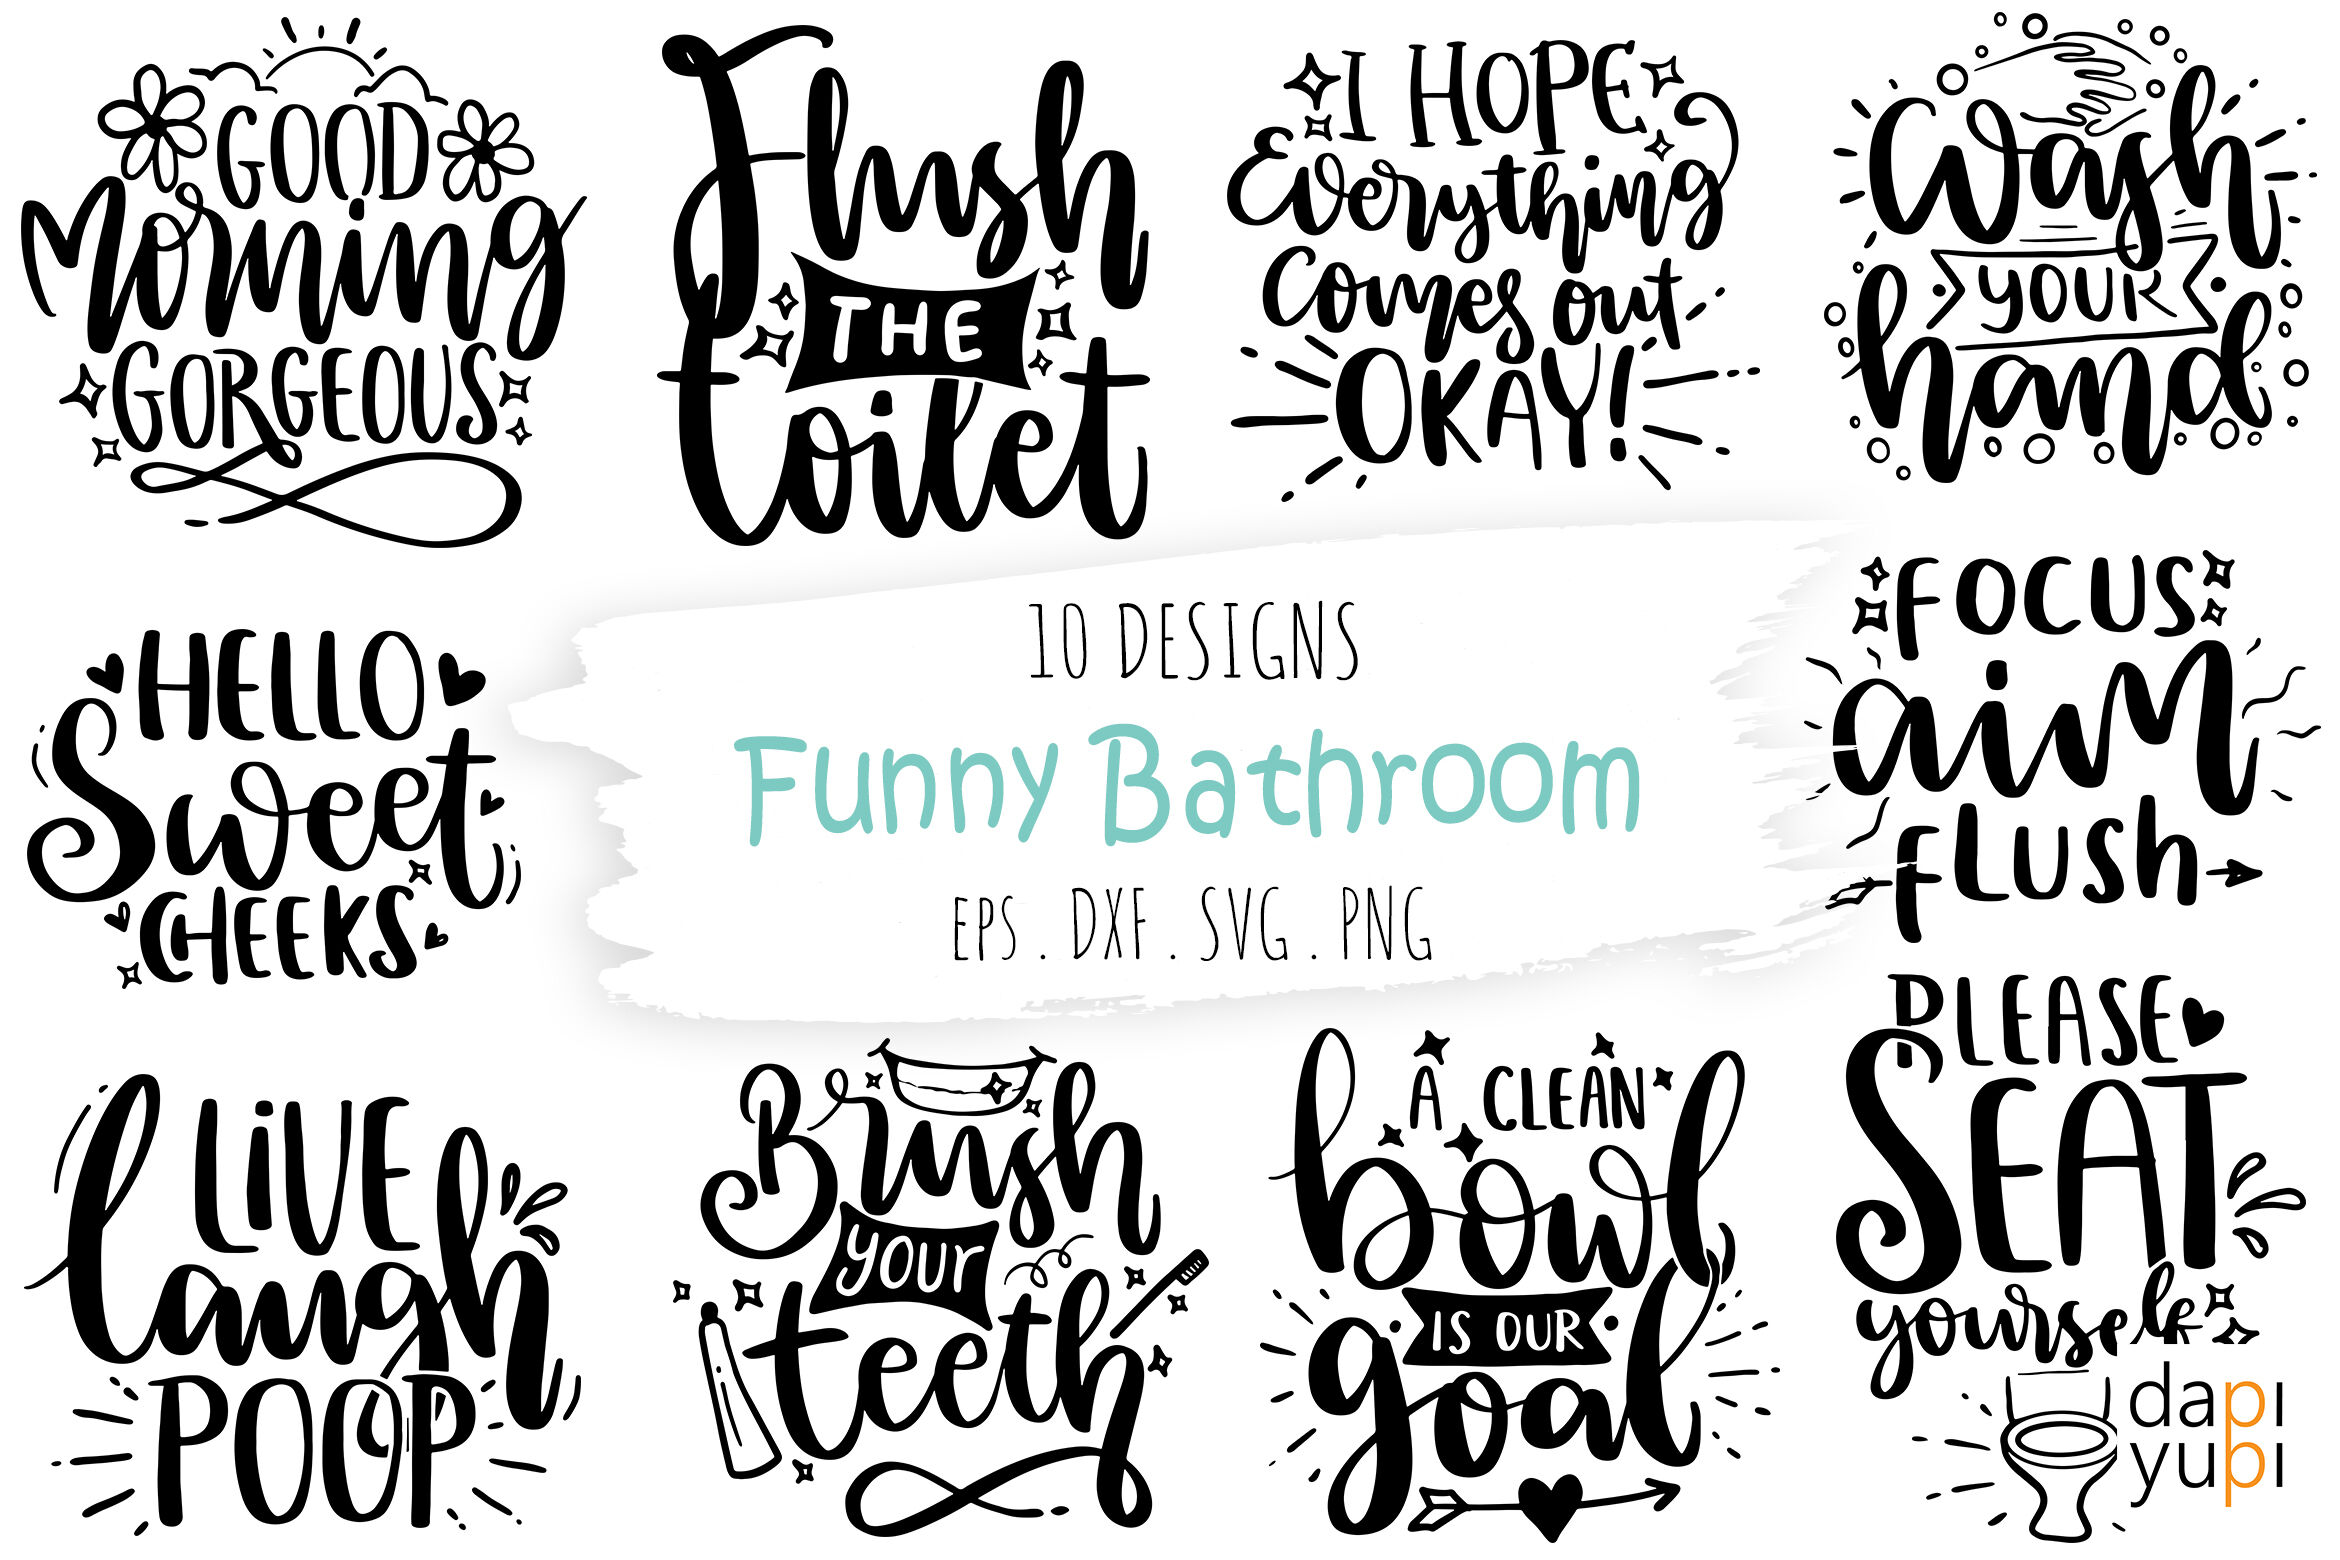 SVG Funny Toilet Brush Graphic file for cutting or laser machines or other graphic design uses